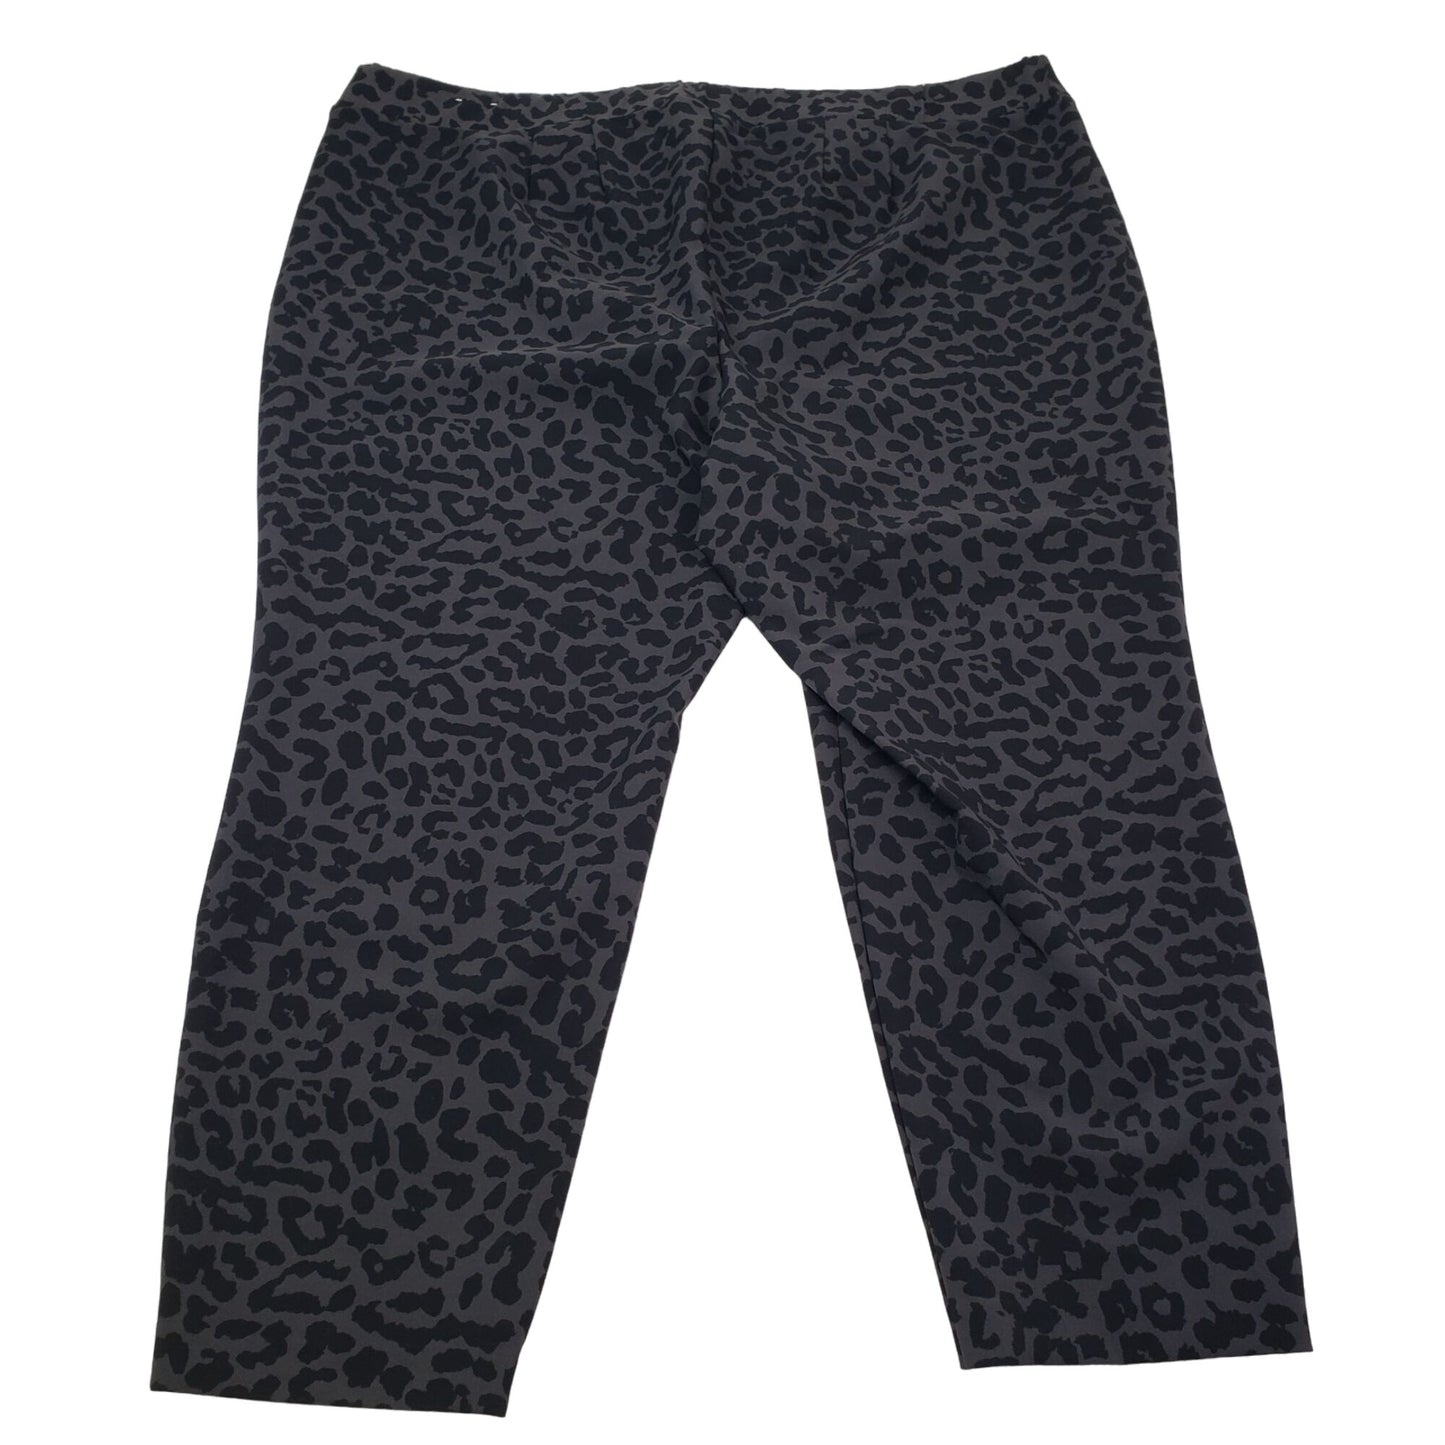 Lane Bryant On-the-Go Slim Ankle Pant in Leopard Print Size 28